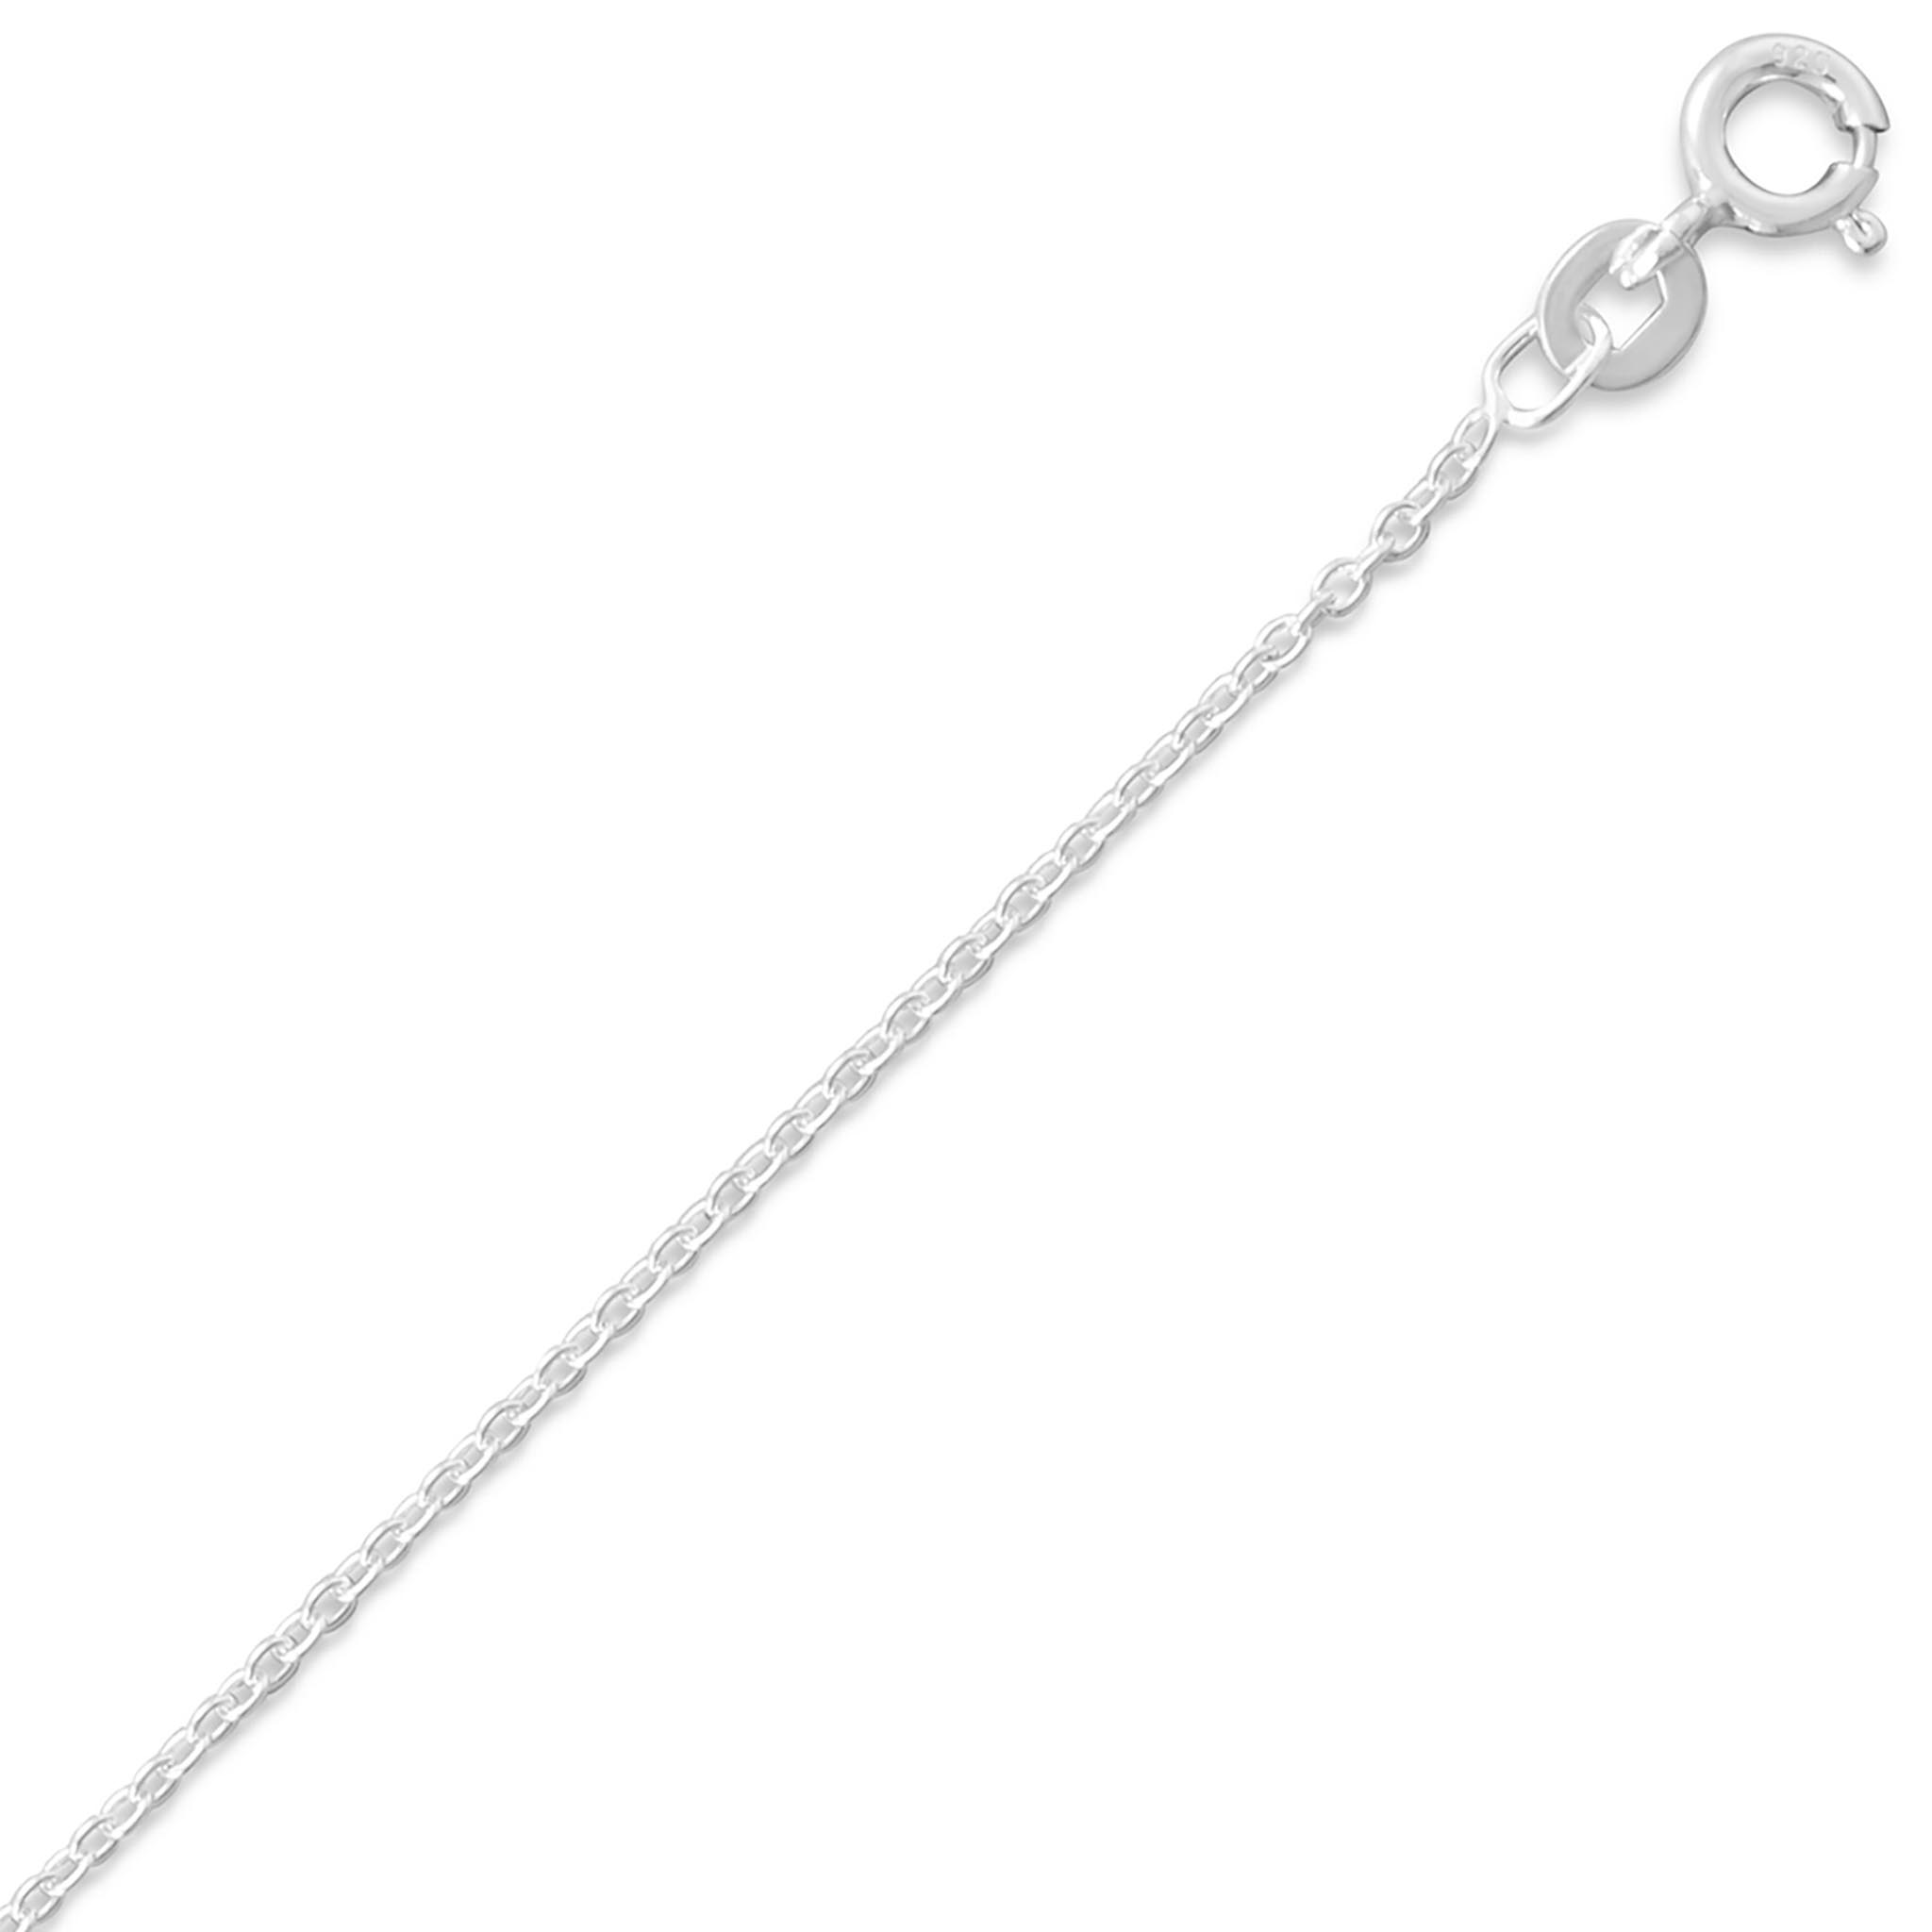 Cable Chain - 1.2mm